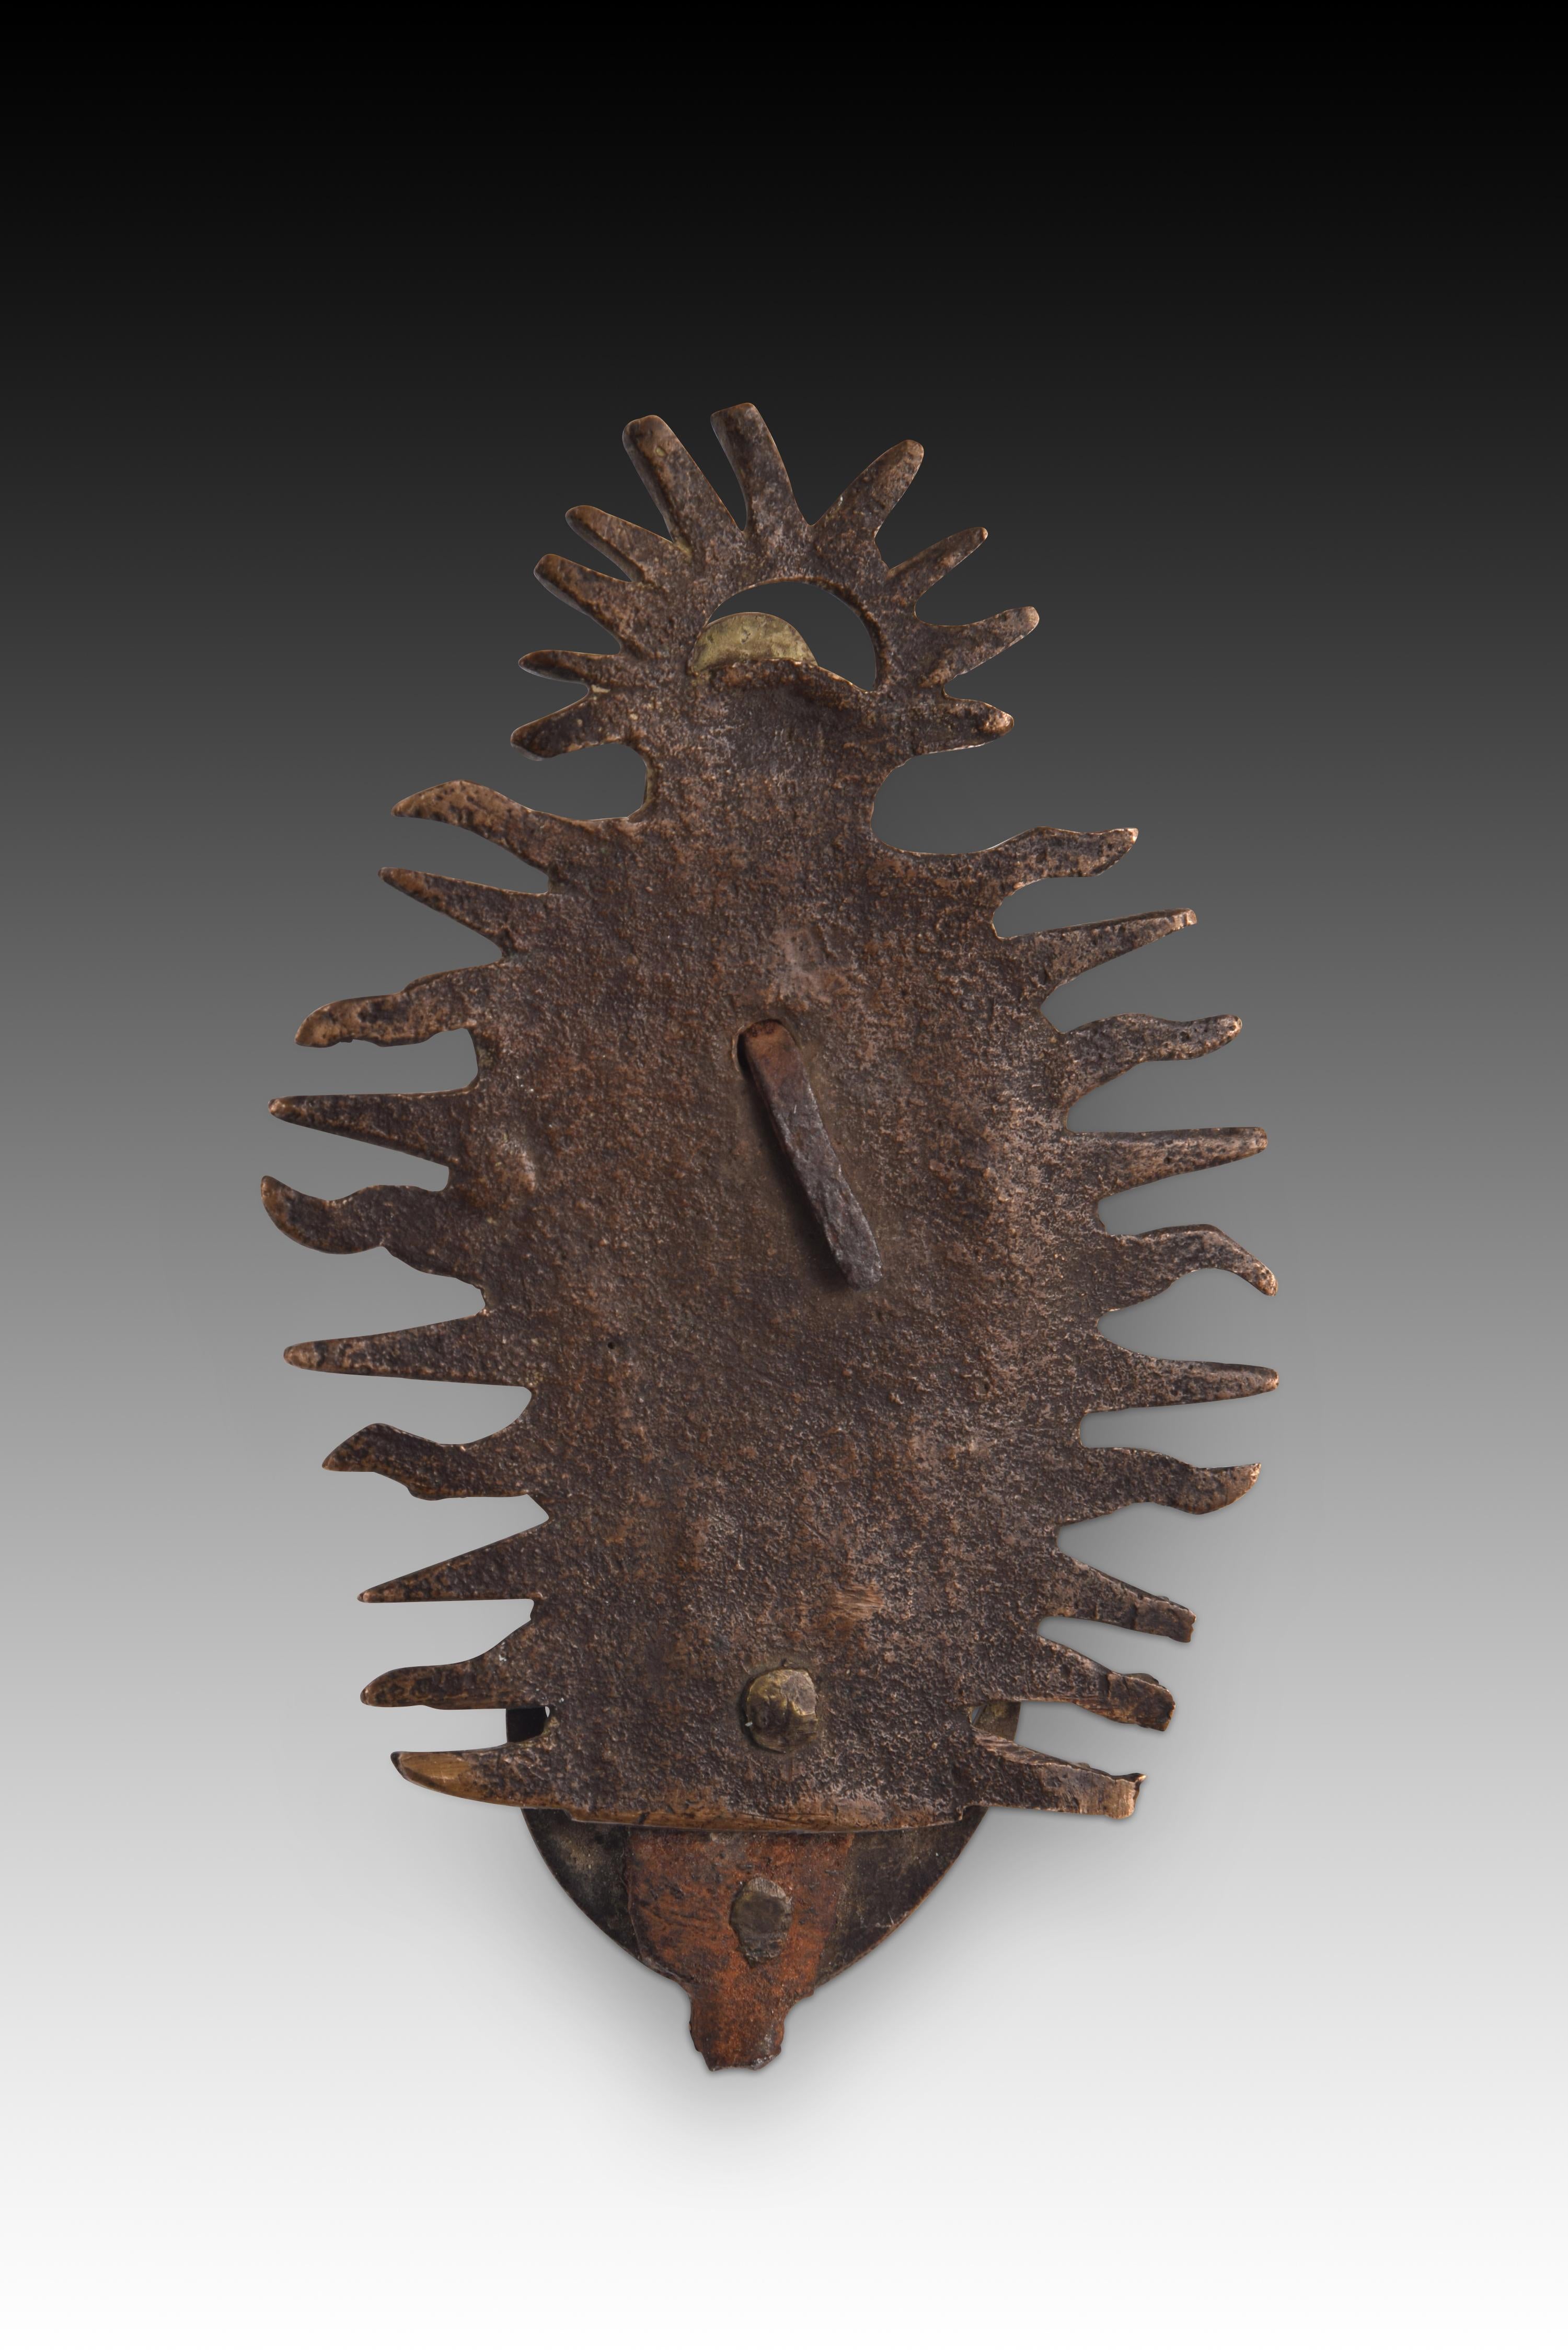 Immaculate. Bronze. Spanish school, 17th century. 
Bronze relief with gilded remains showing an Immaculate Conception. The Virgin Mary stands on a crescent moon with her peaks upward, dressed in a mantle and tunic, joining her hands on her chest in